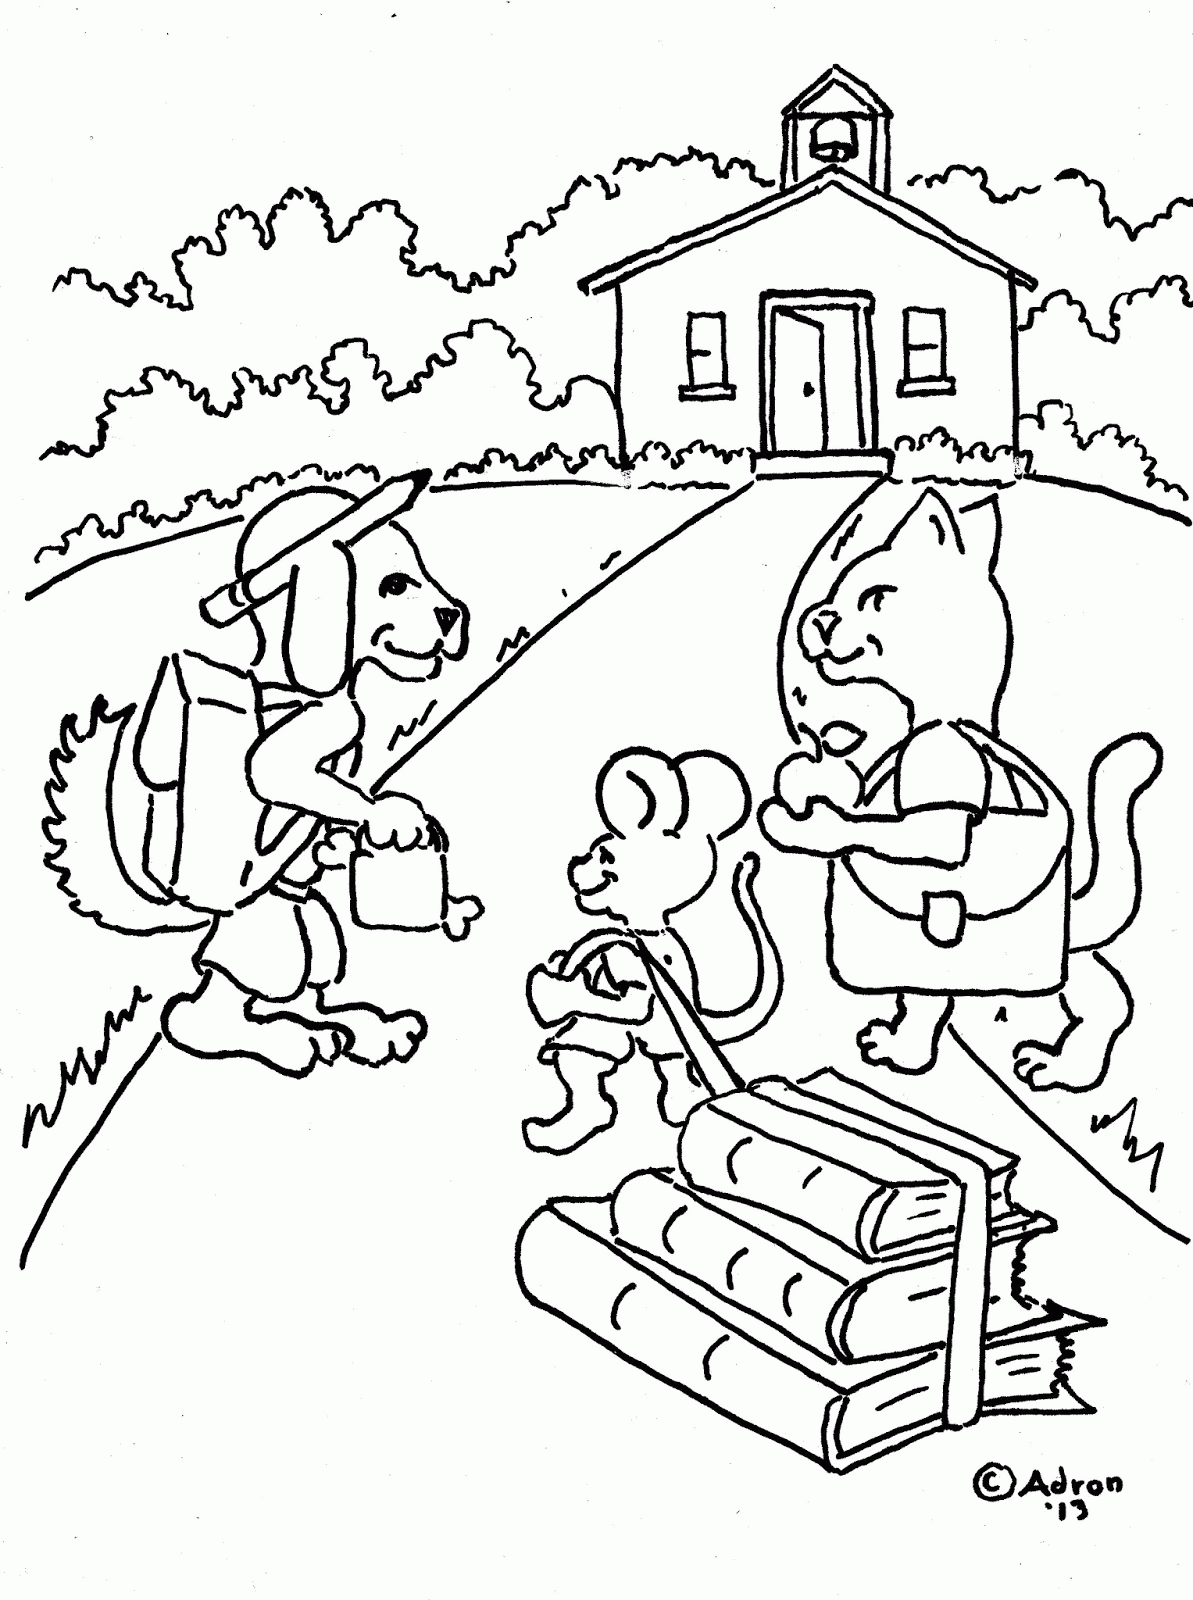 Coloring Pages for Kids by Mr. Adron: Animals Go To School Print ...